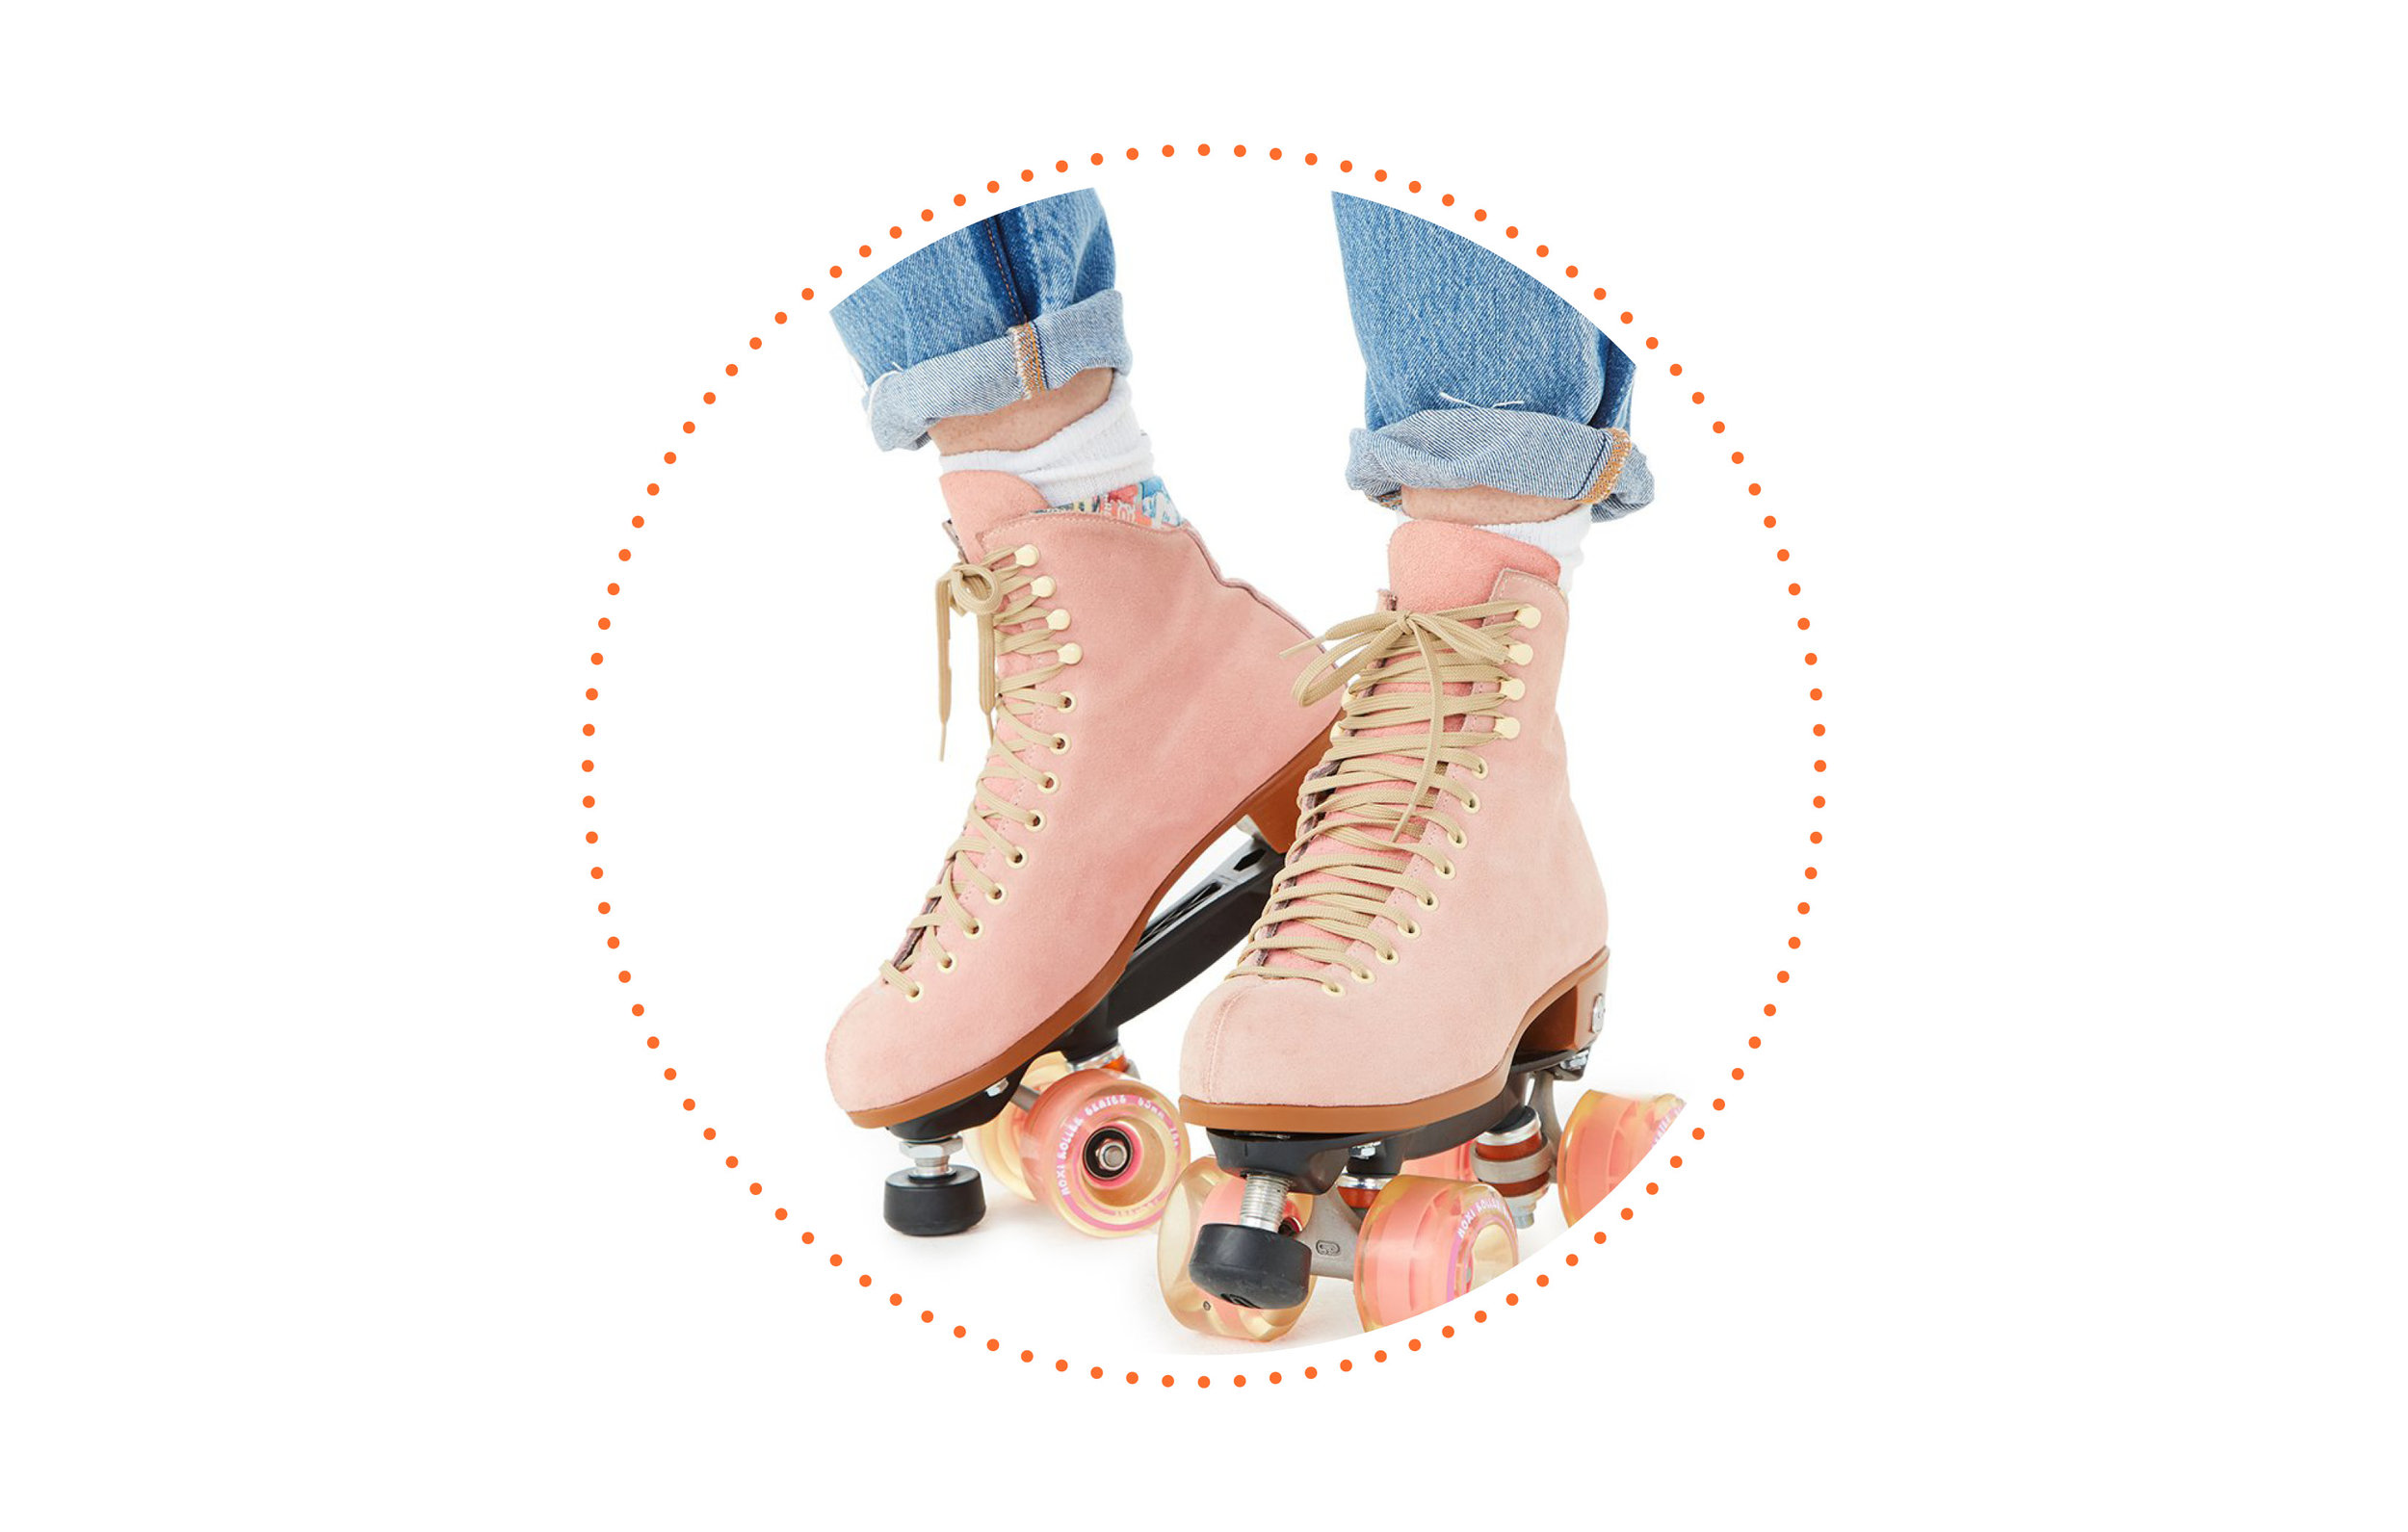 Most embarrassing moment? - The time in middle school my jeans split when roller skating in gym class.